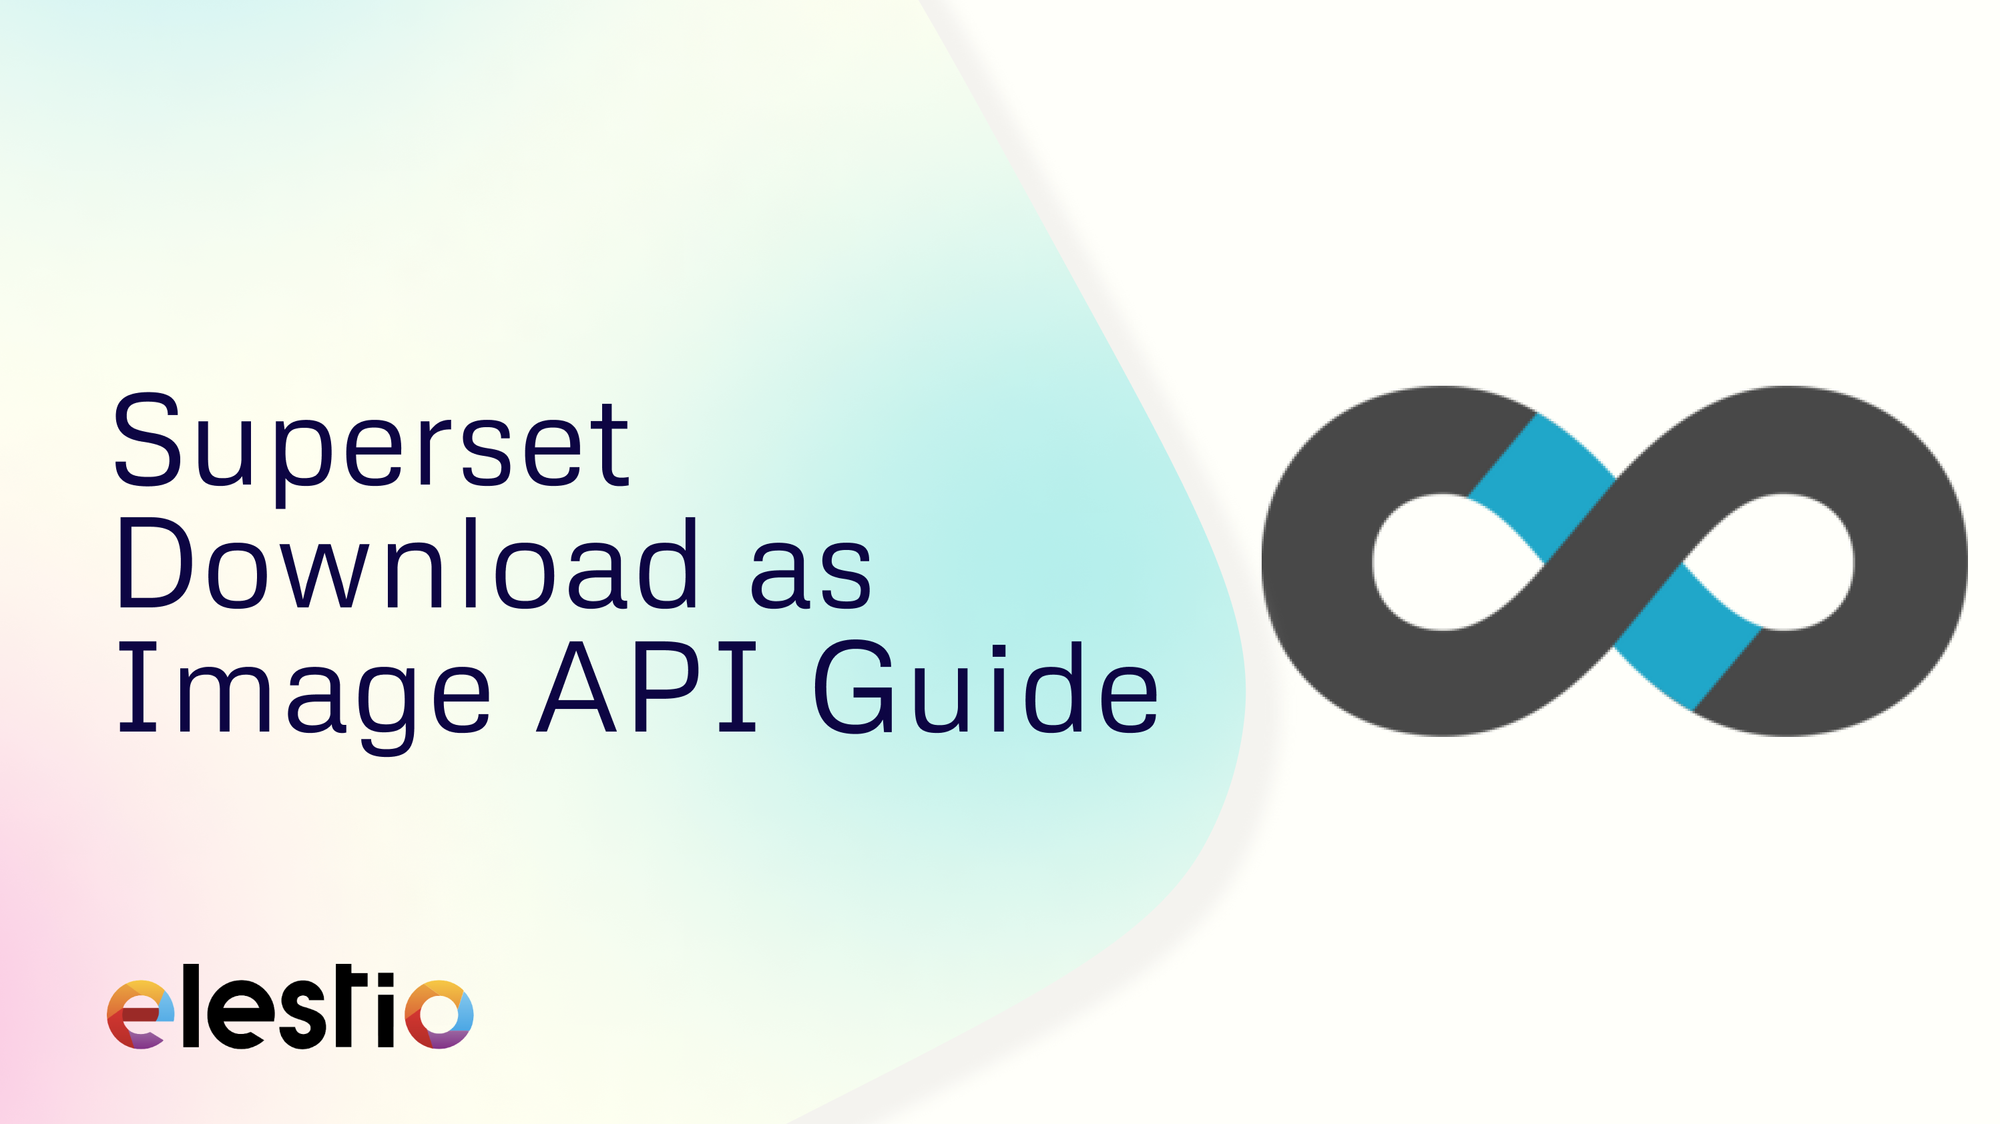 Superset Download as Image API Guide